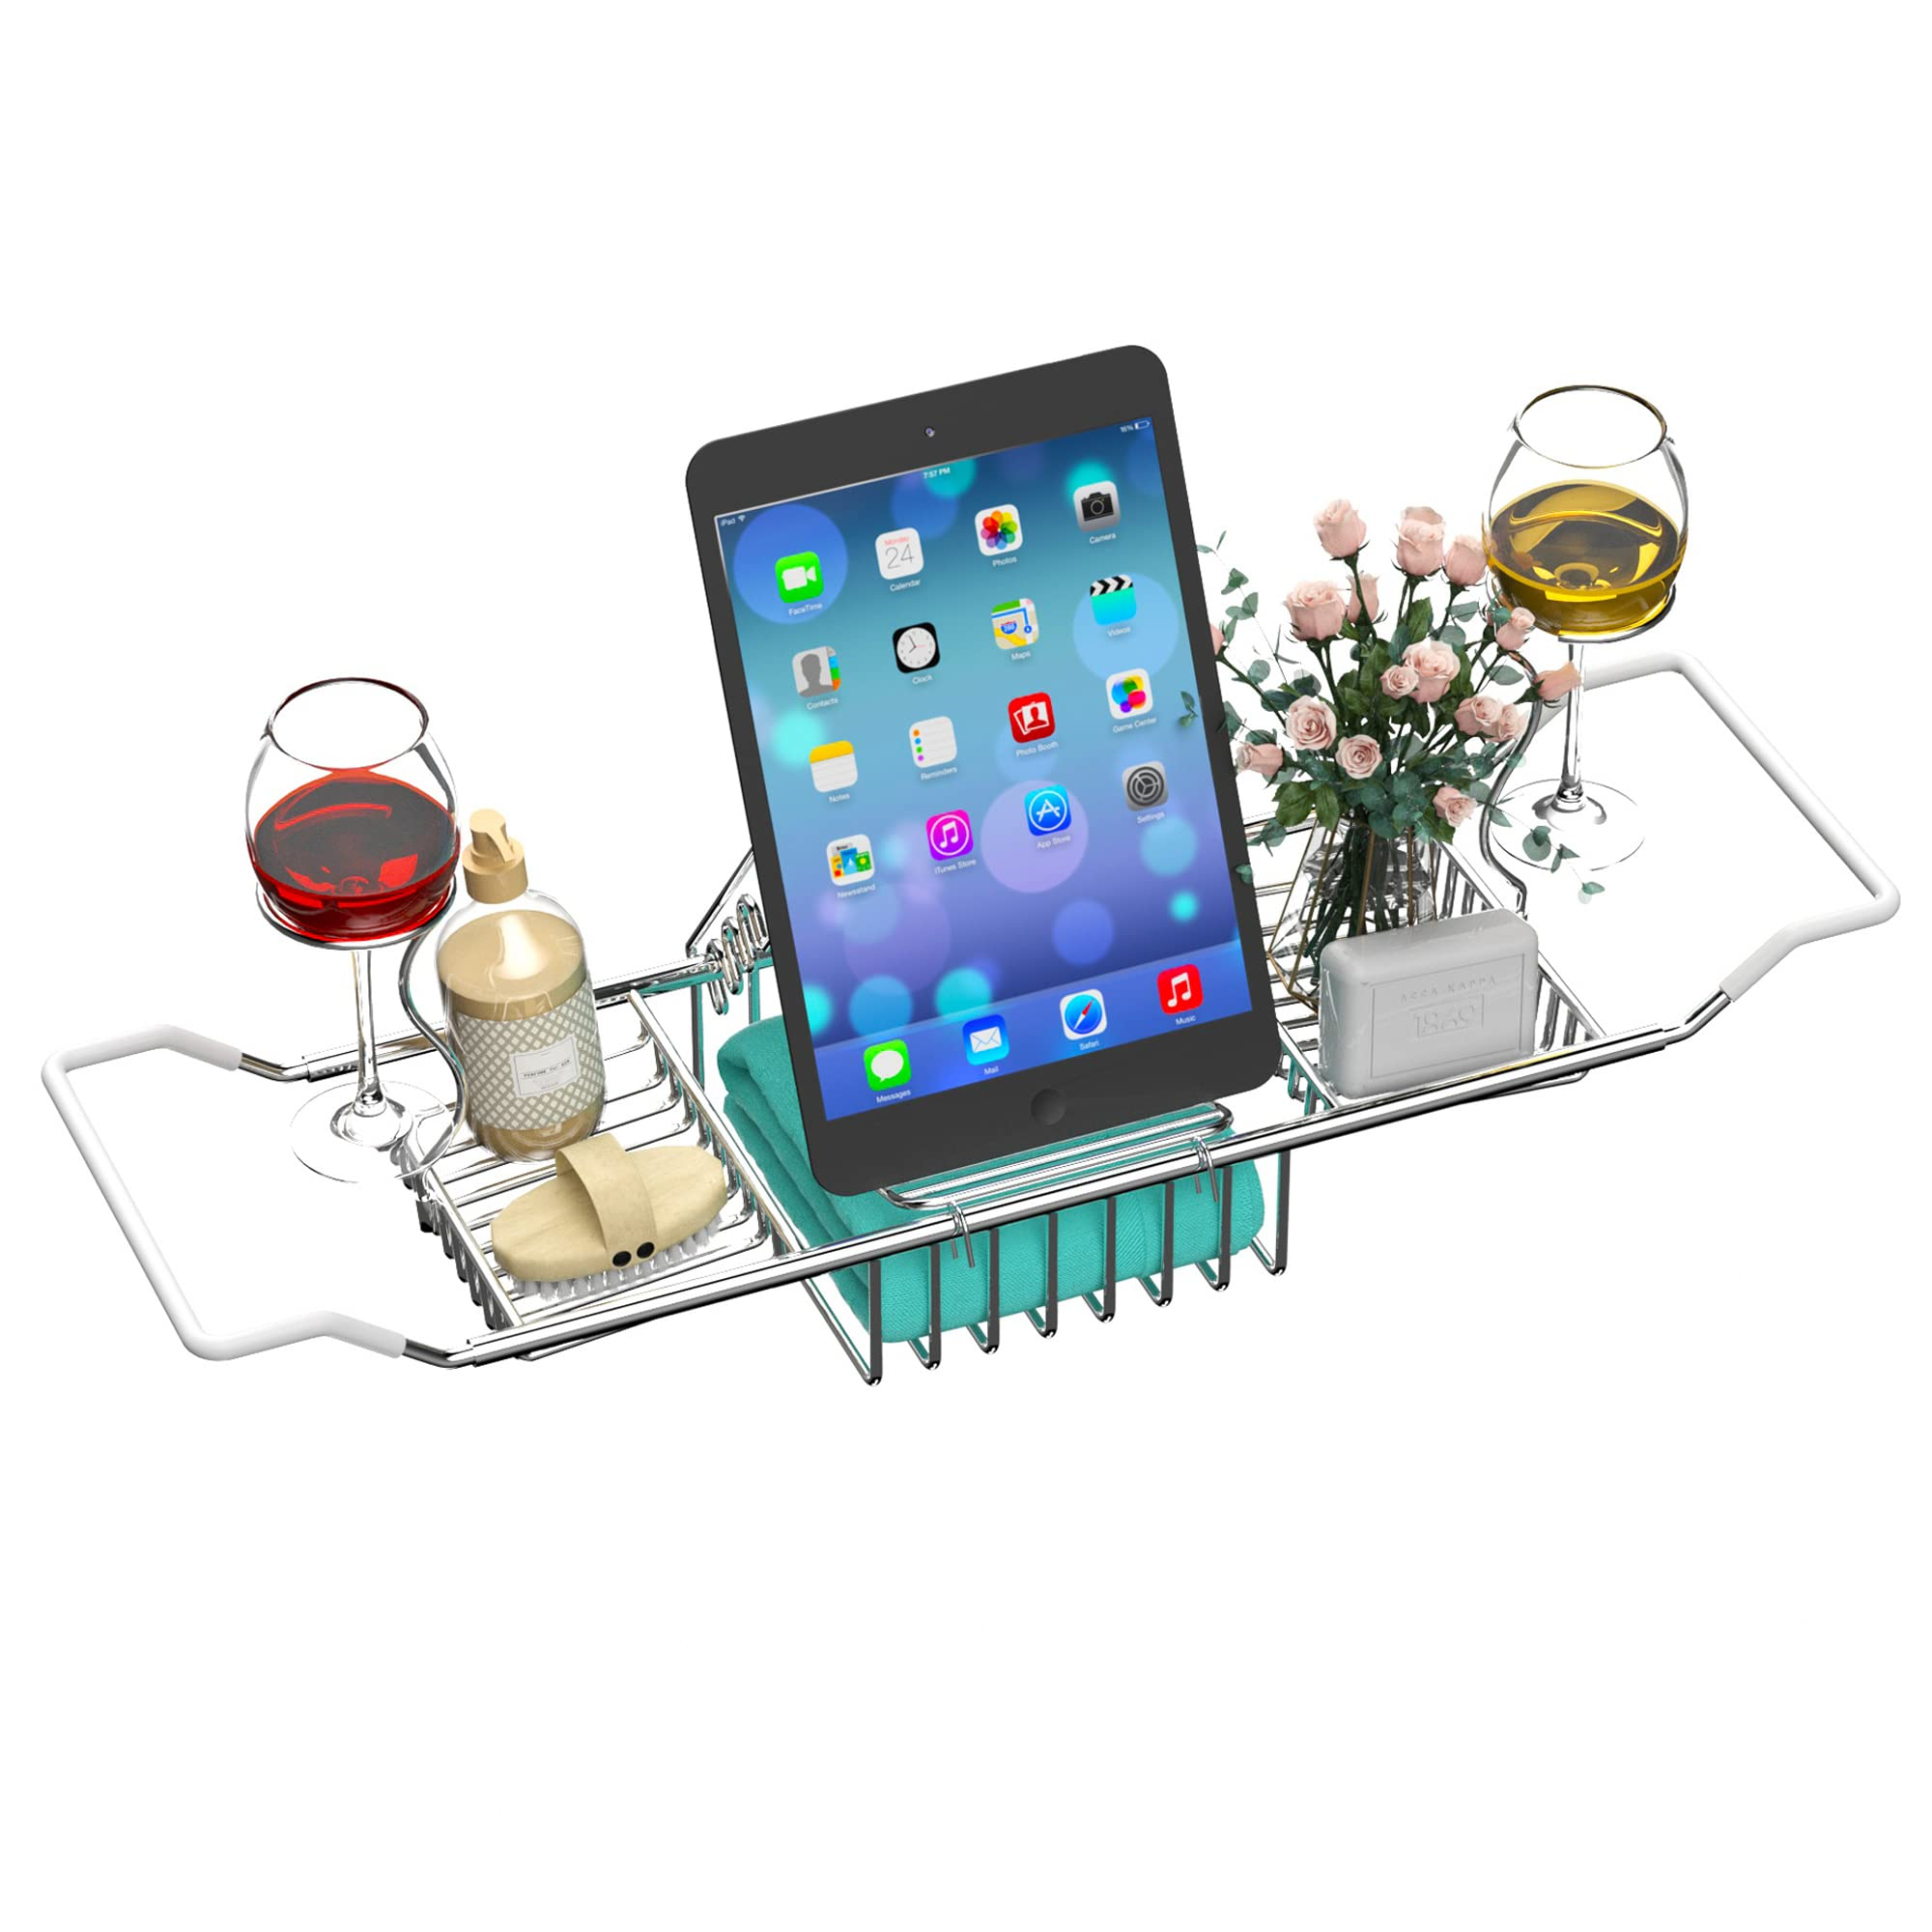 ᐅ【WOODBRIDGE Stainless Steel Extendable Bathtub Caddy Tray in Brushed  Nickel Finish with Removable Wine Holder, Book and Phone Rack,  Bathcad-BN-WOODBRIDGE】